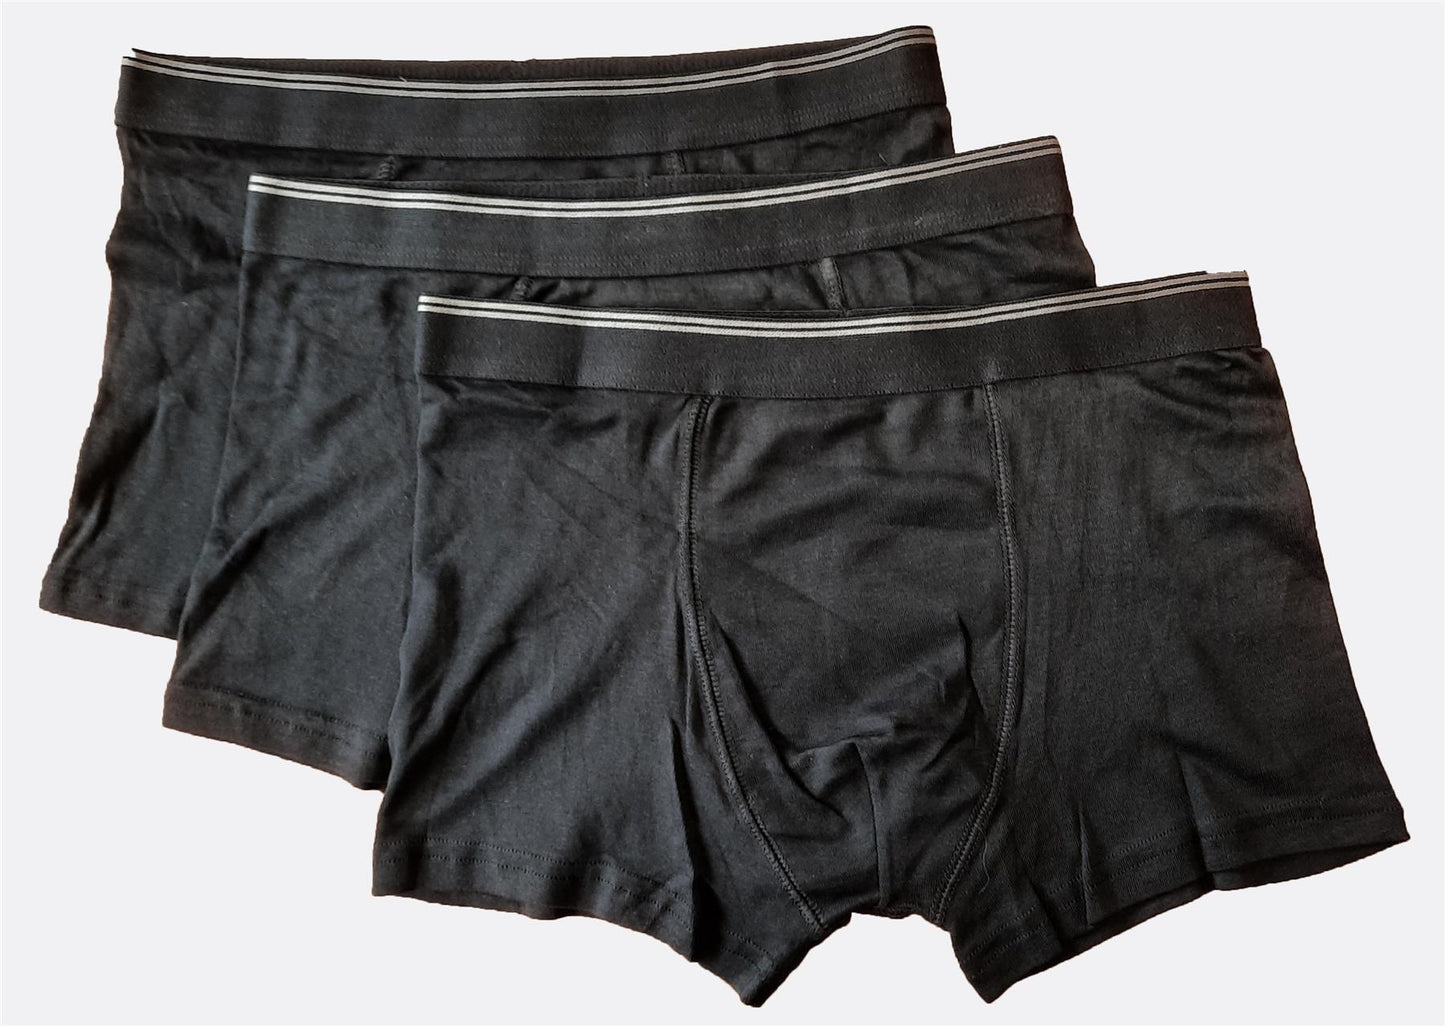 Men's Hipster Stretch Boxer Shorts Trunks (Pack of 3)